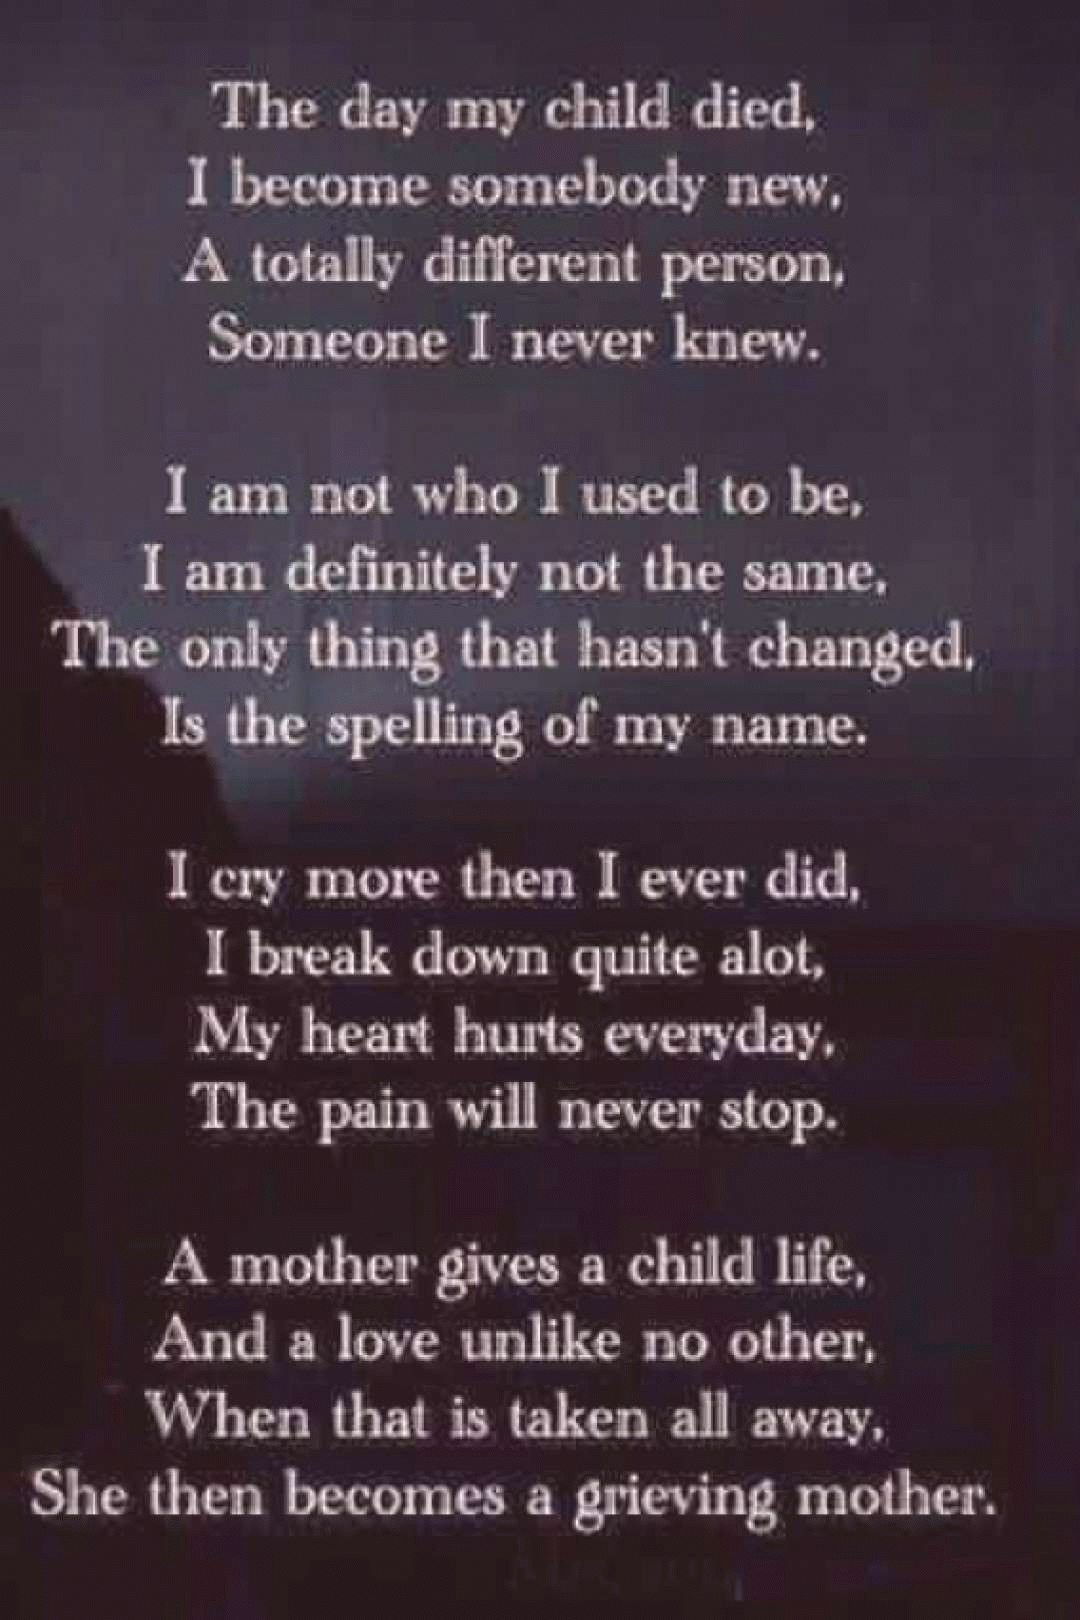 pin by nancy shively on quotes in 2020 grieving quotes baby loss quotes losing a child quotes small